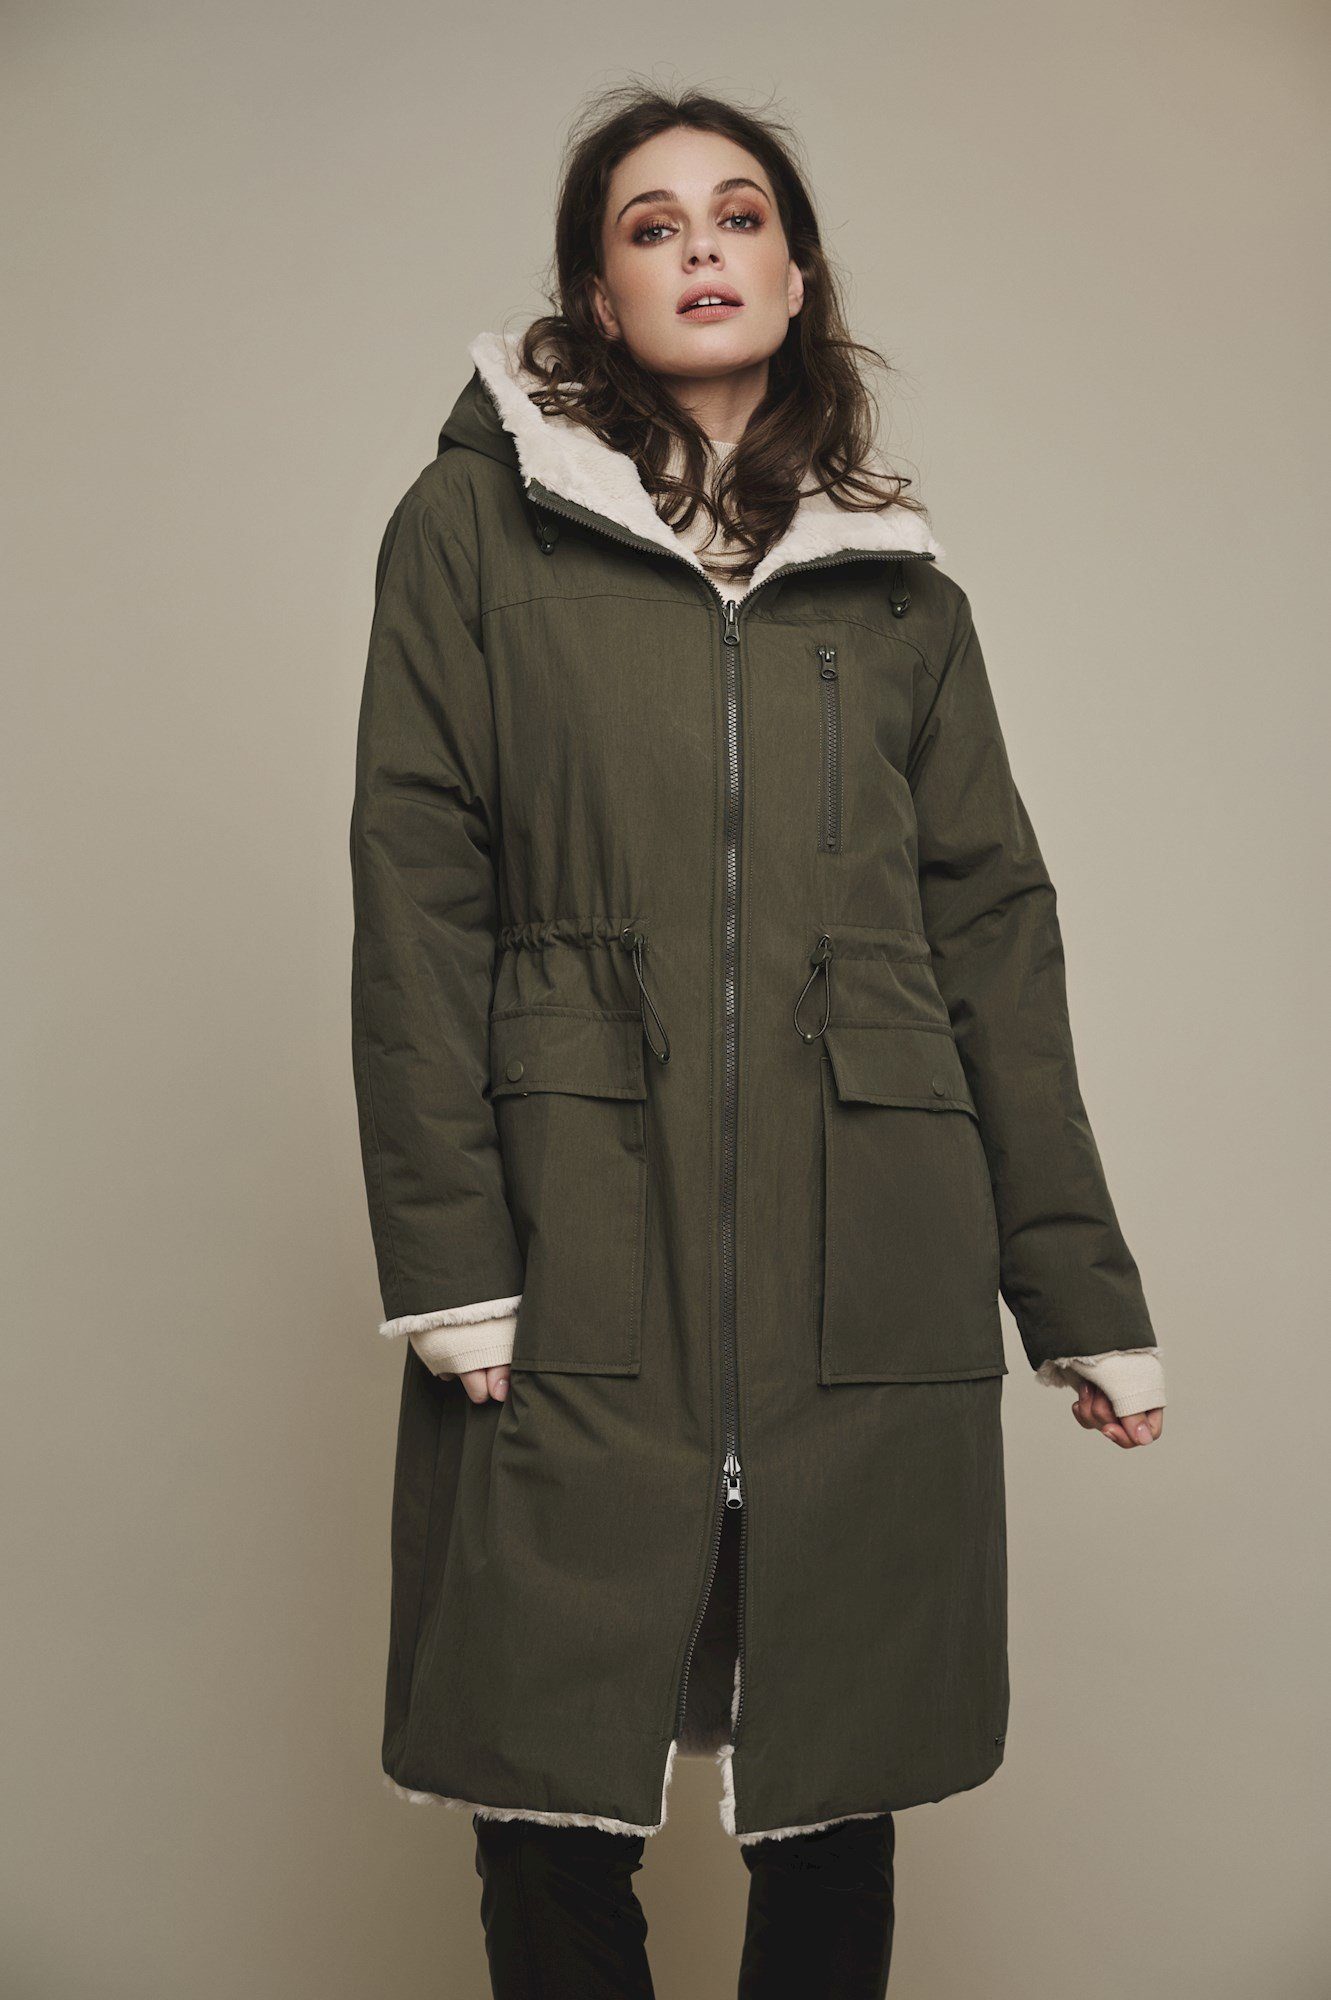 Rino & Pelle Langmantel Reversible long hooded coat with faux fur lining dark olive and stone